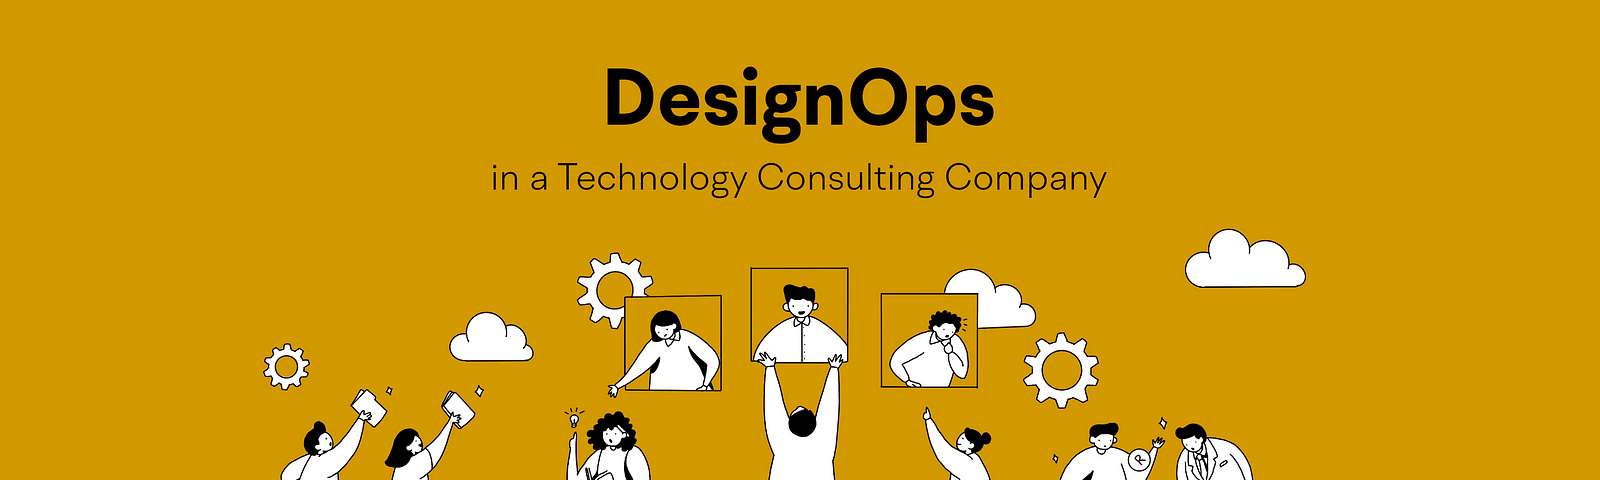 Cover Image: “DesignOps in a Technology Consulting Company”